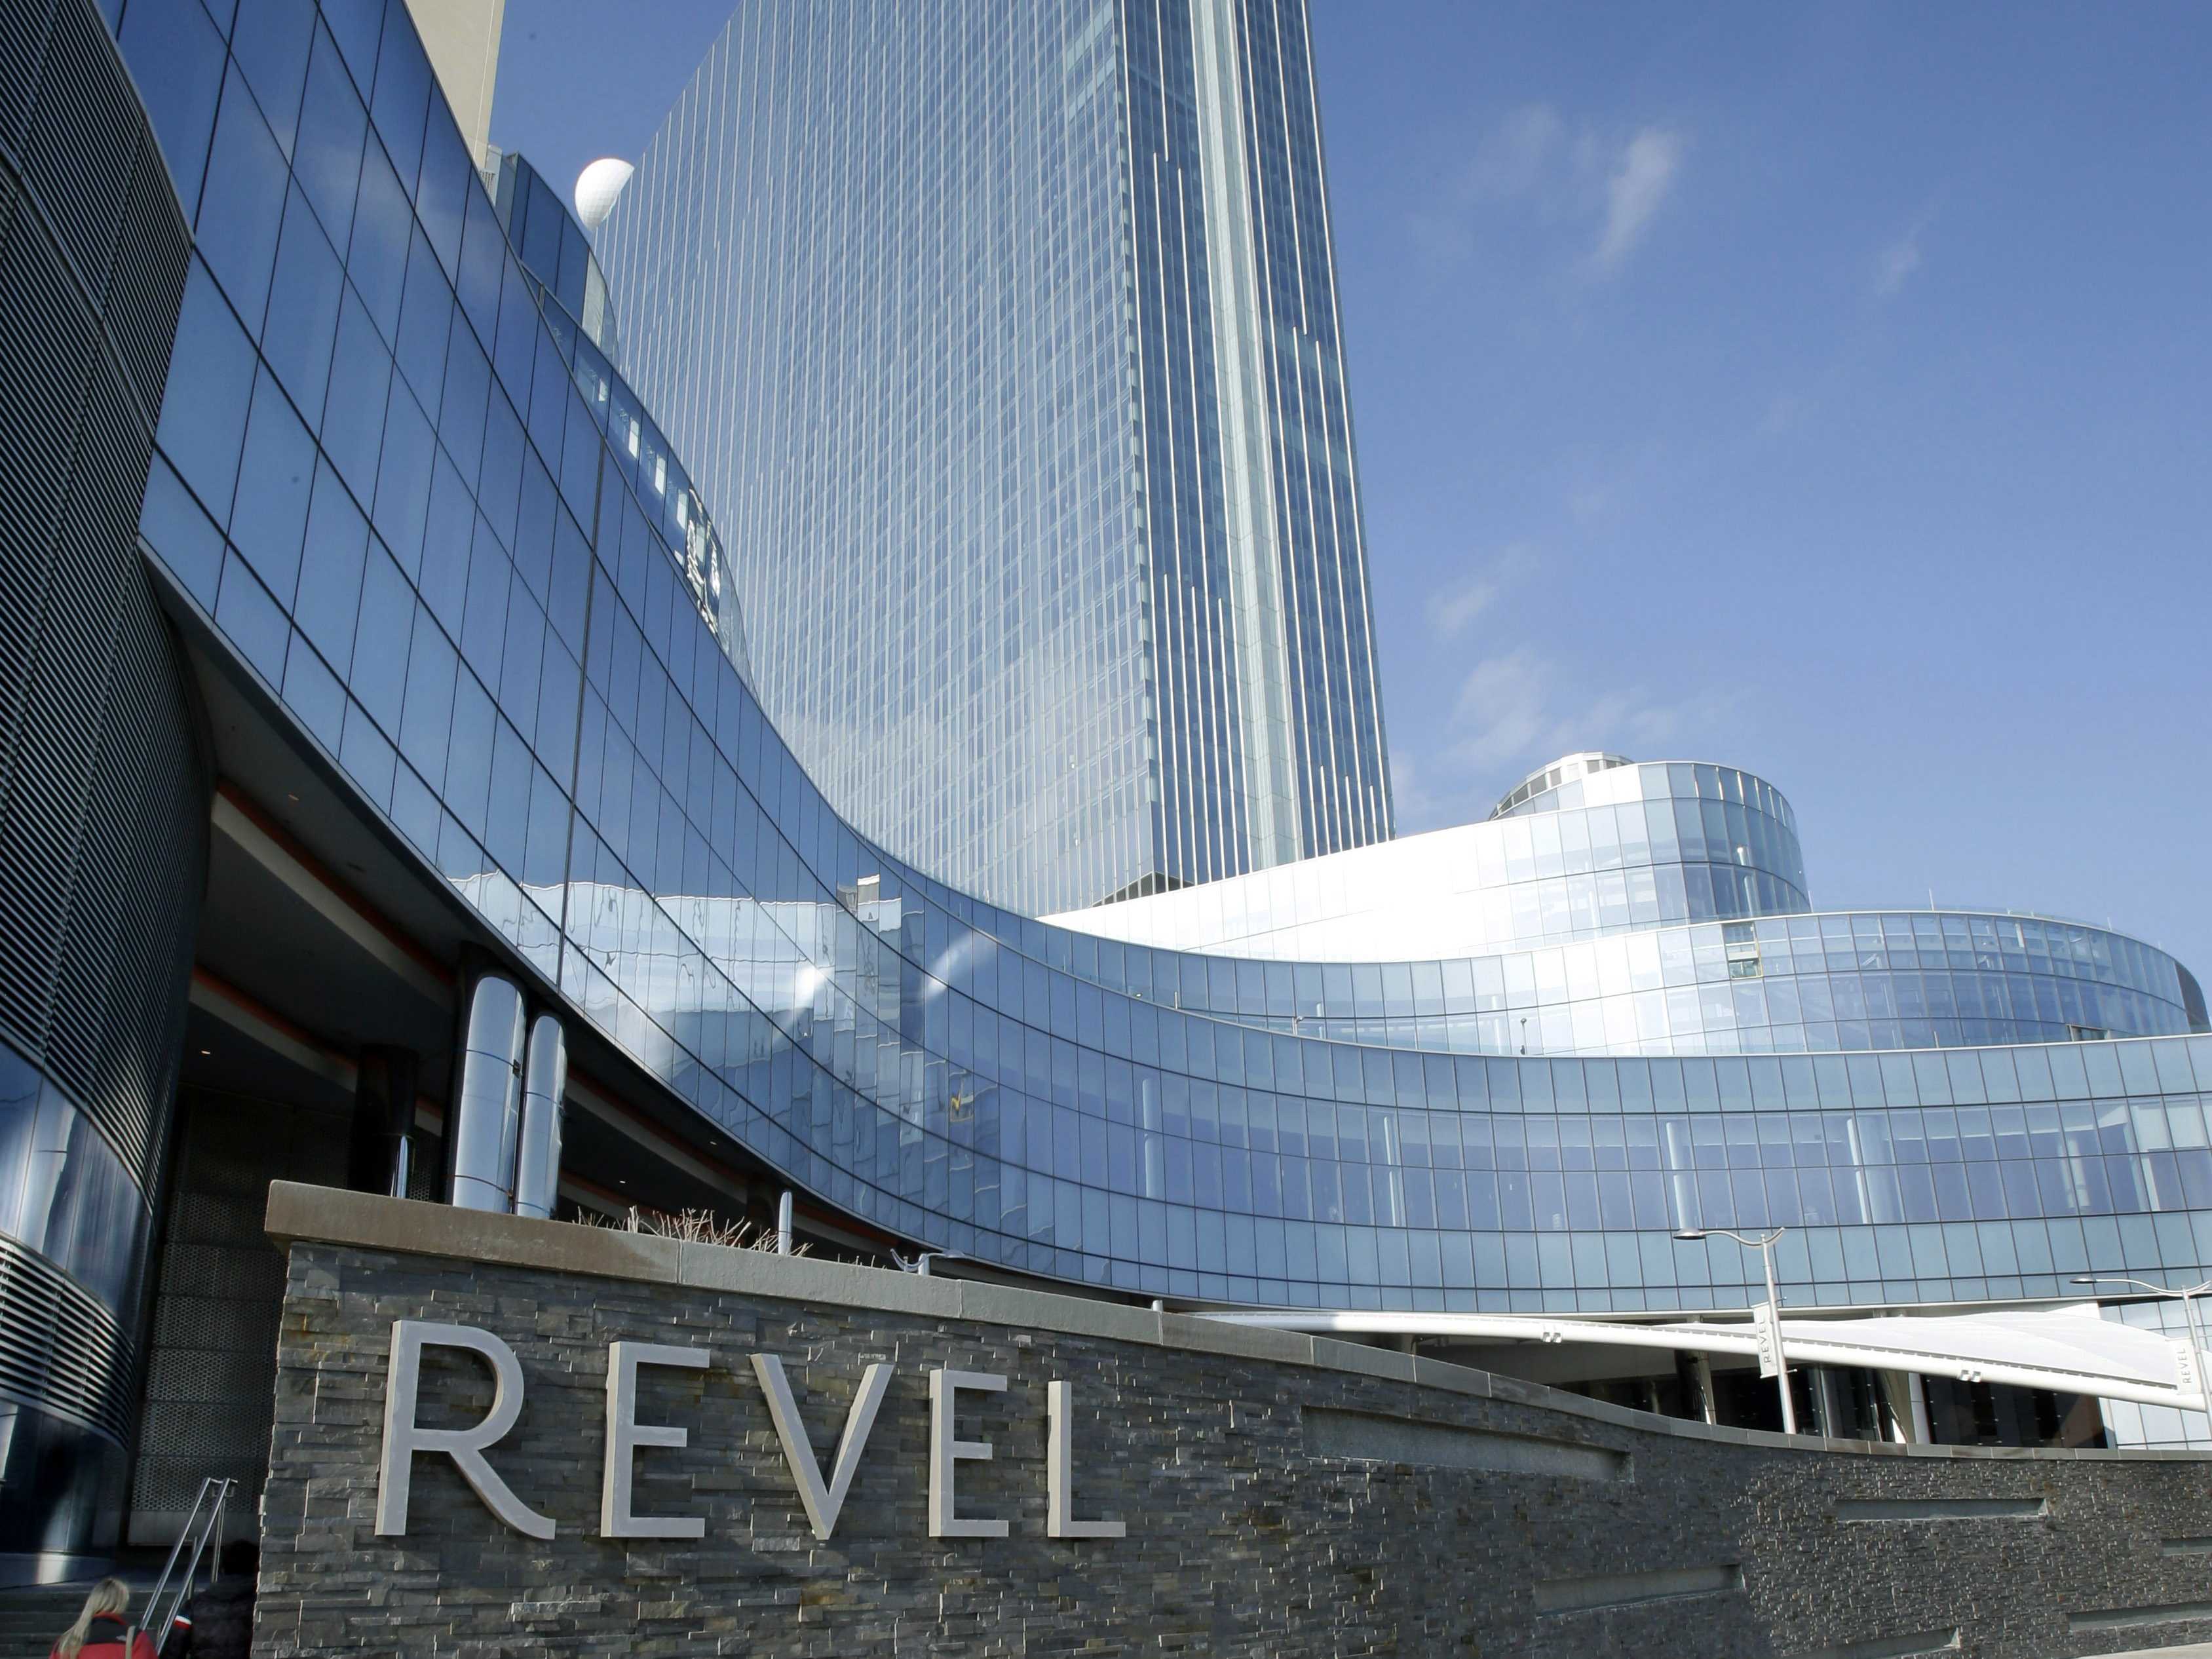 Signage on the Norstone stacked stone wall at the Revel Casino in Atlantic City as seen from the boardwalk